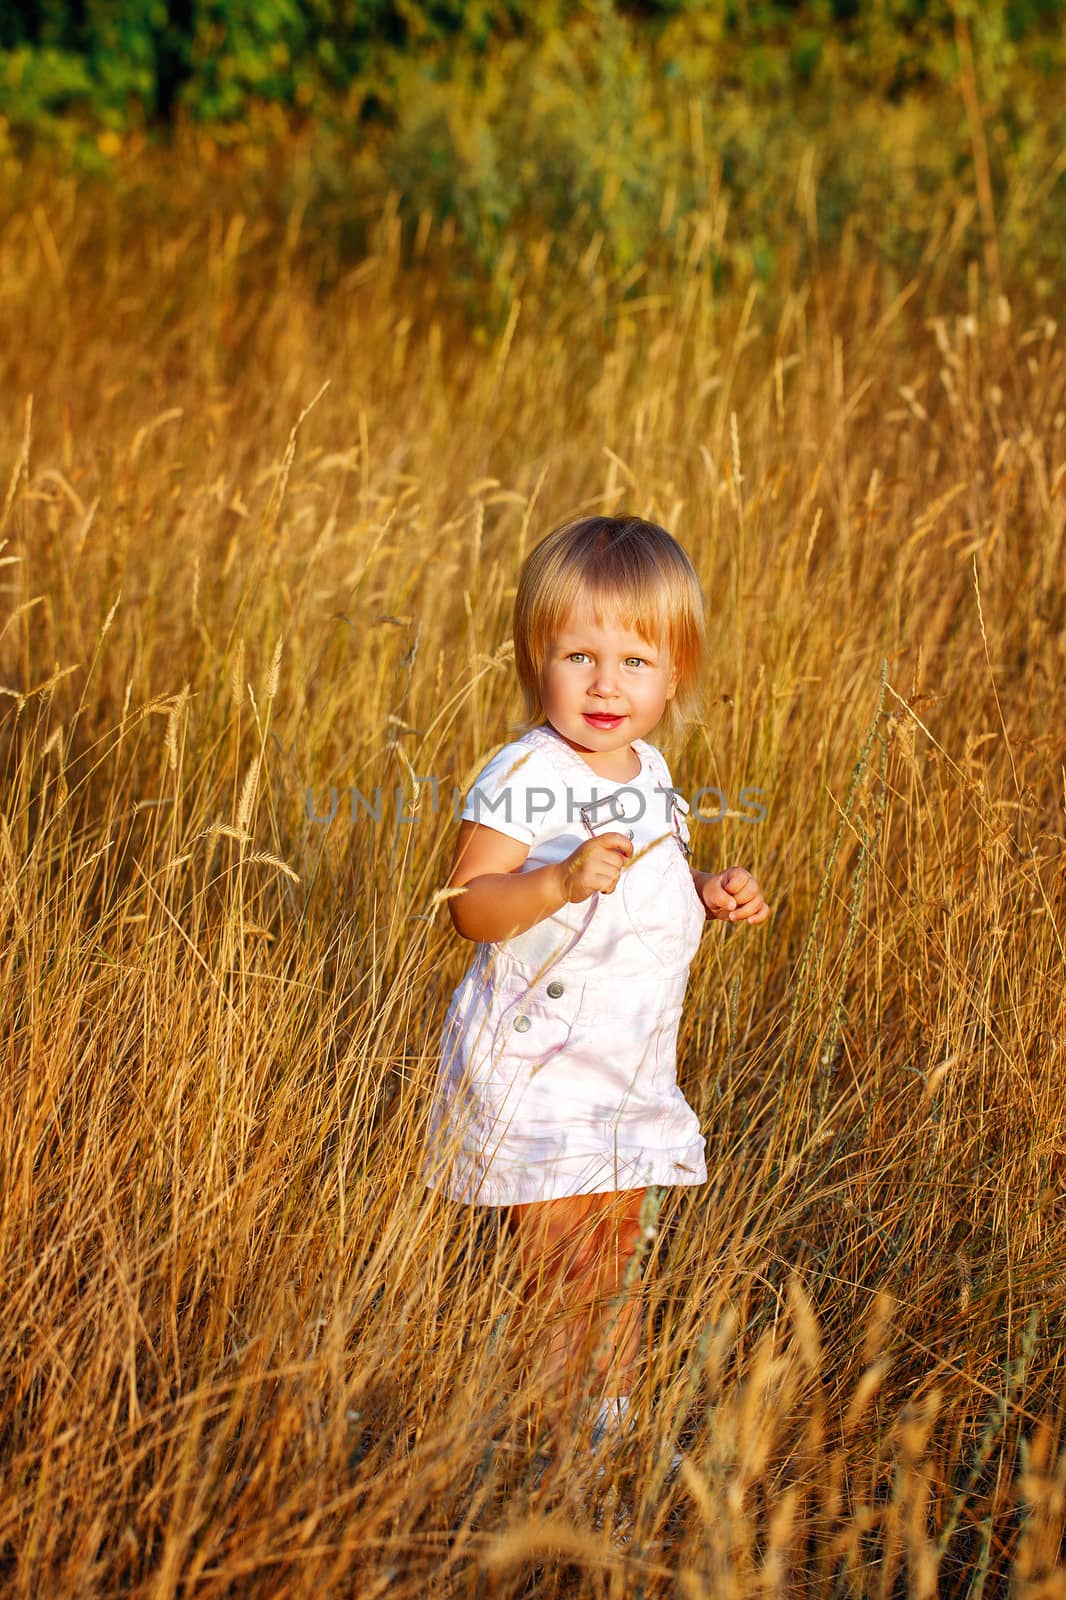 Blonde girl walking through the ears of wheat at sunset